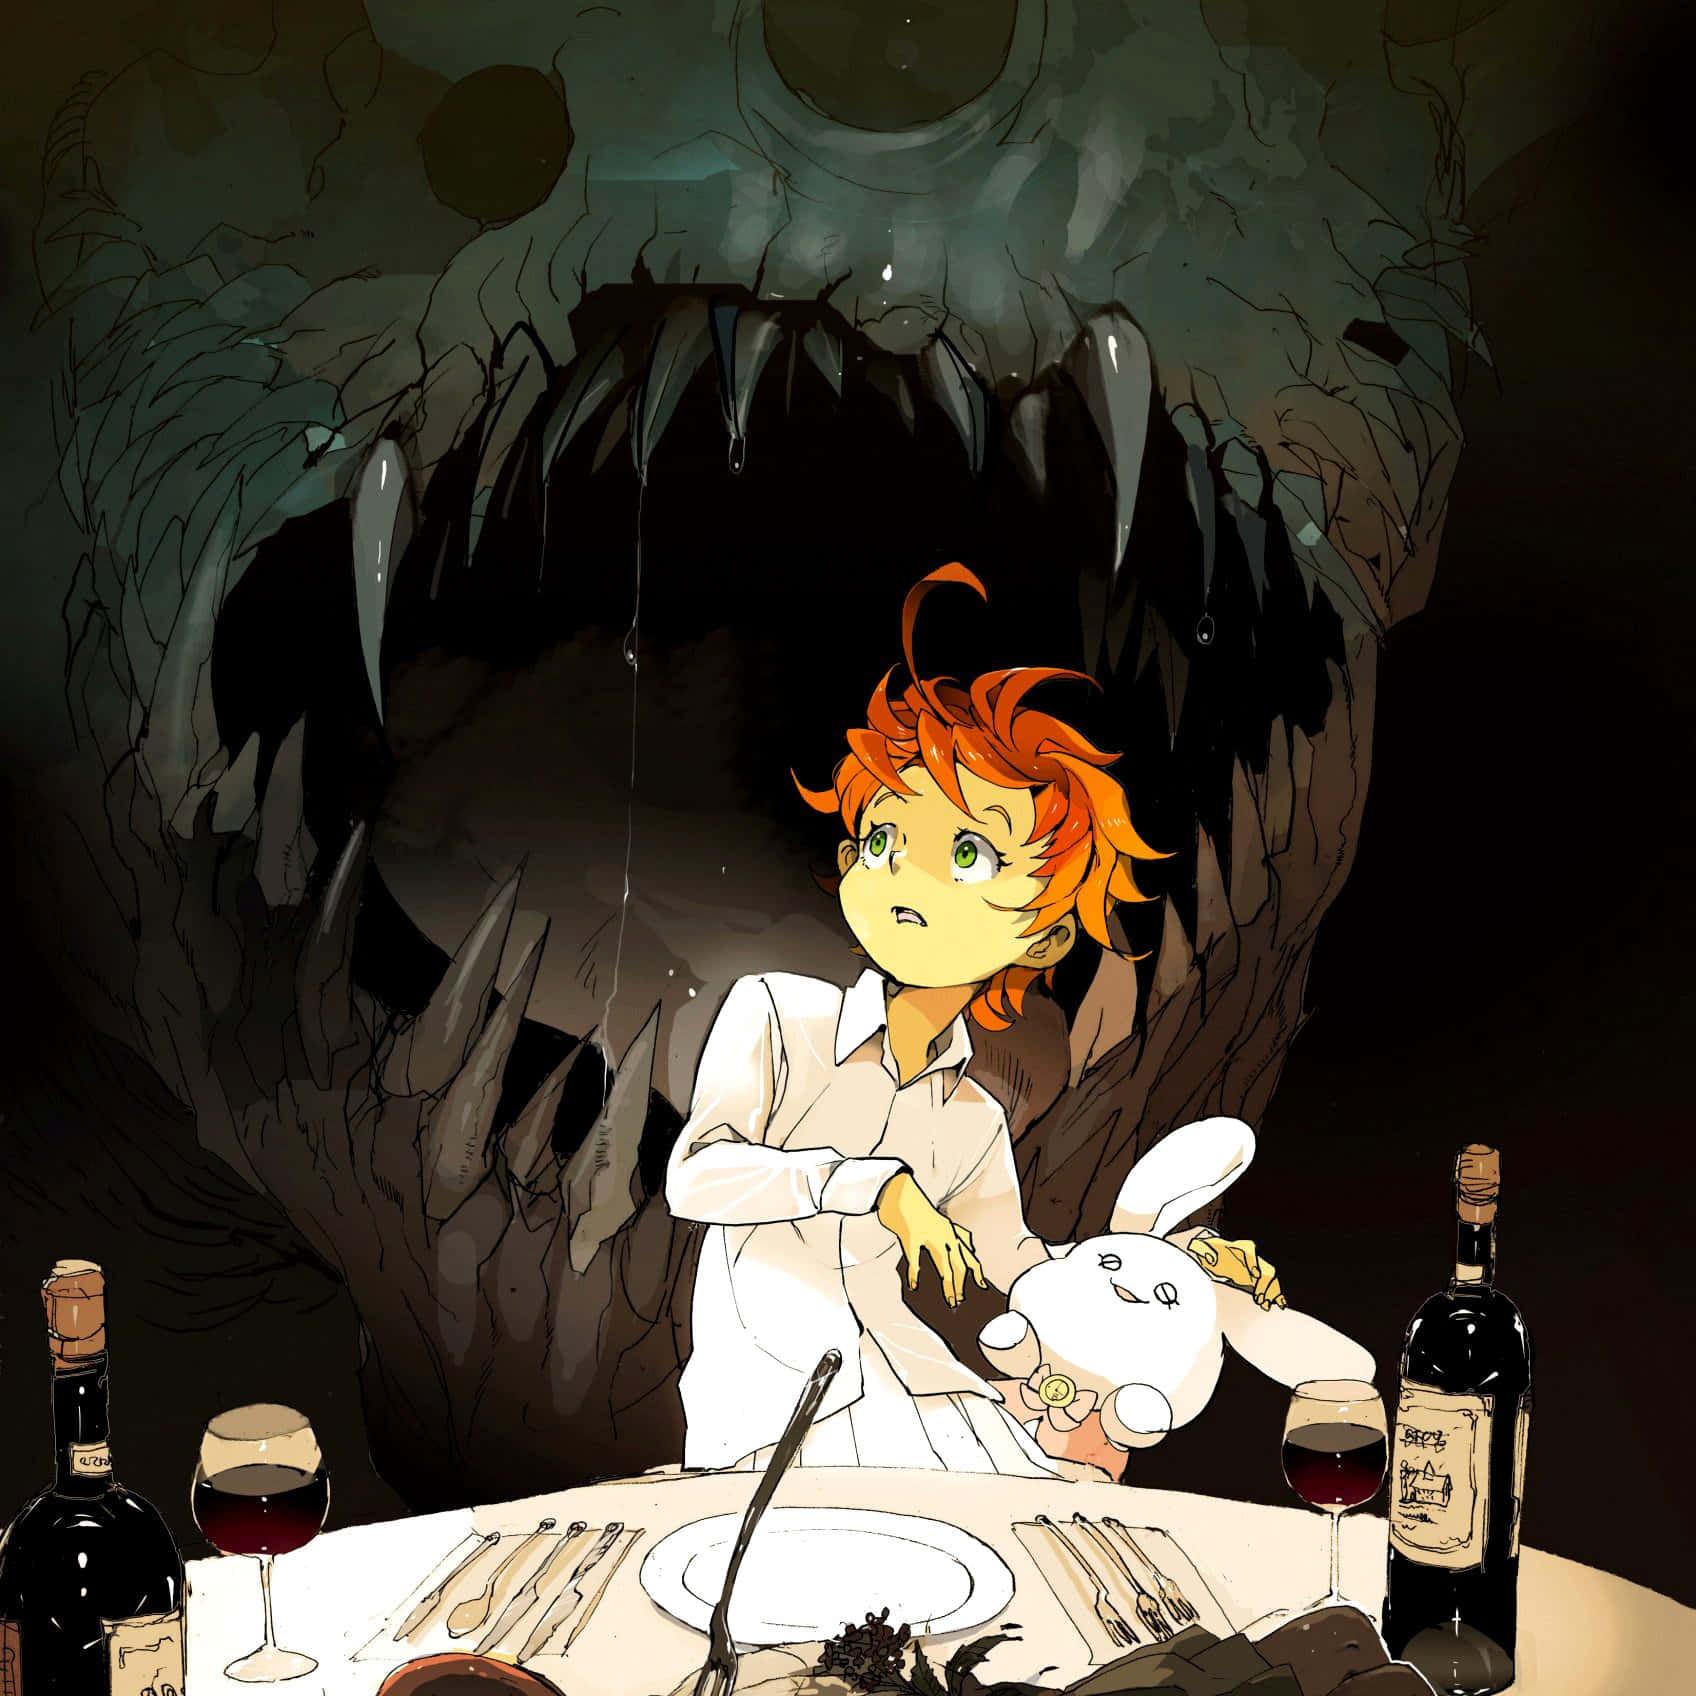 The Promised Neverland Anime Characters in a Thrilling Adventure